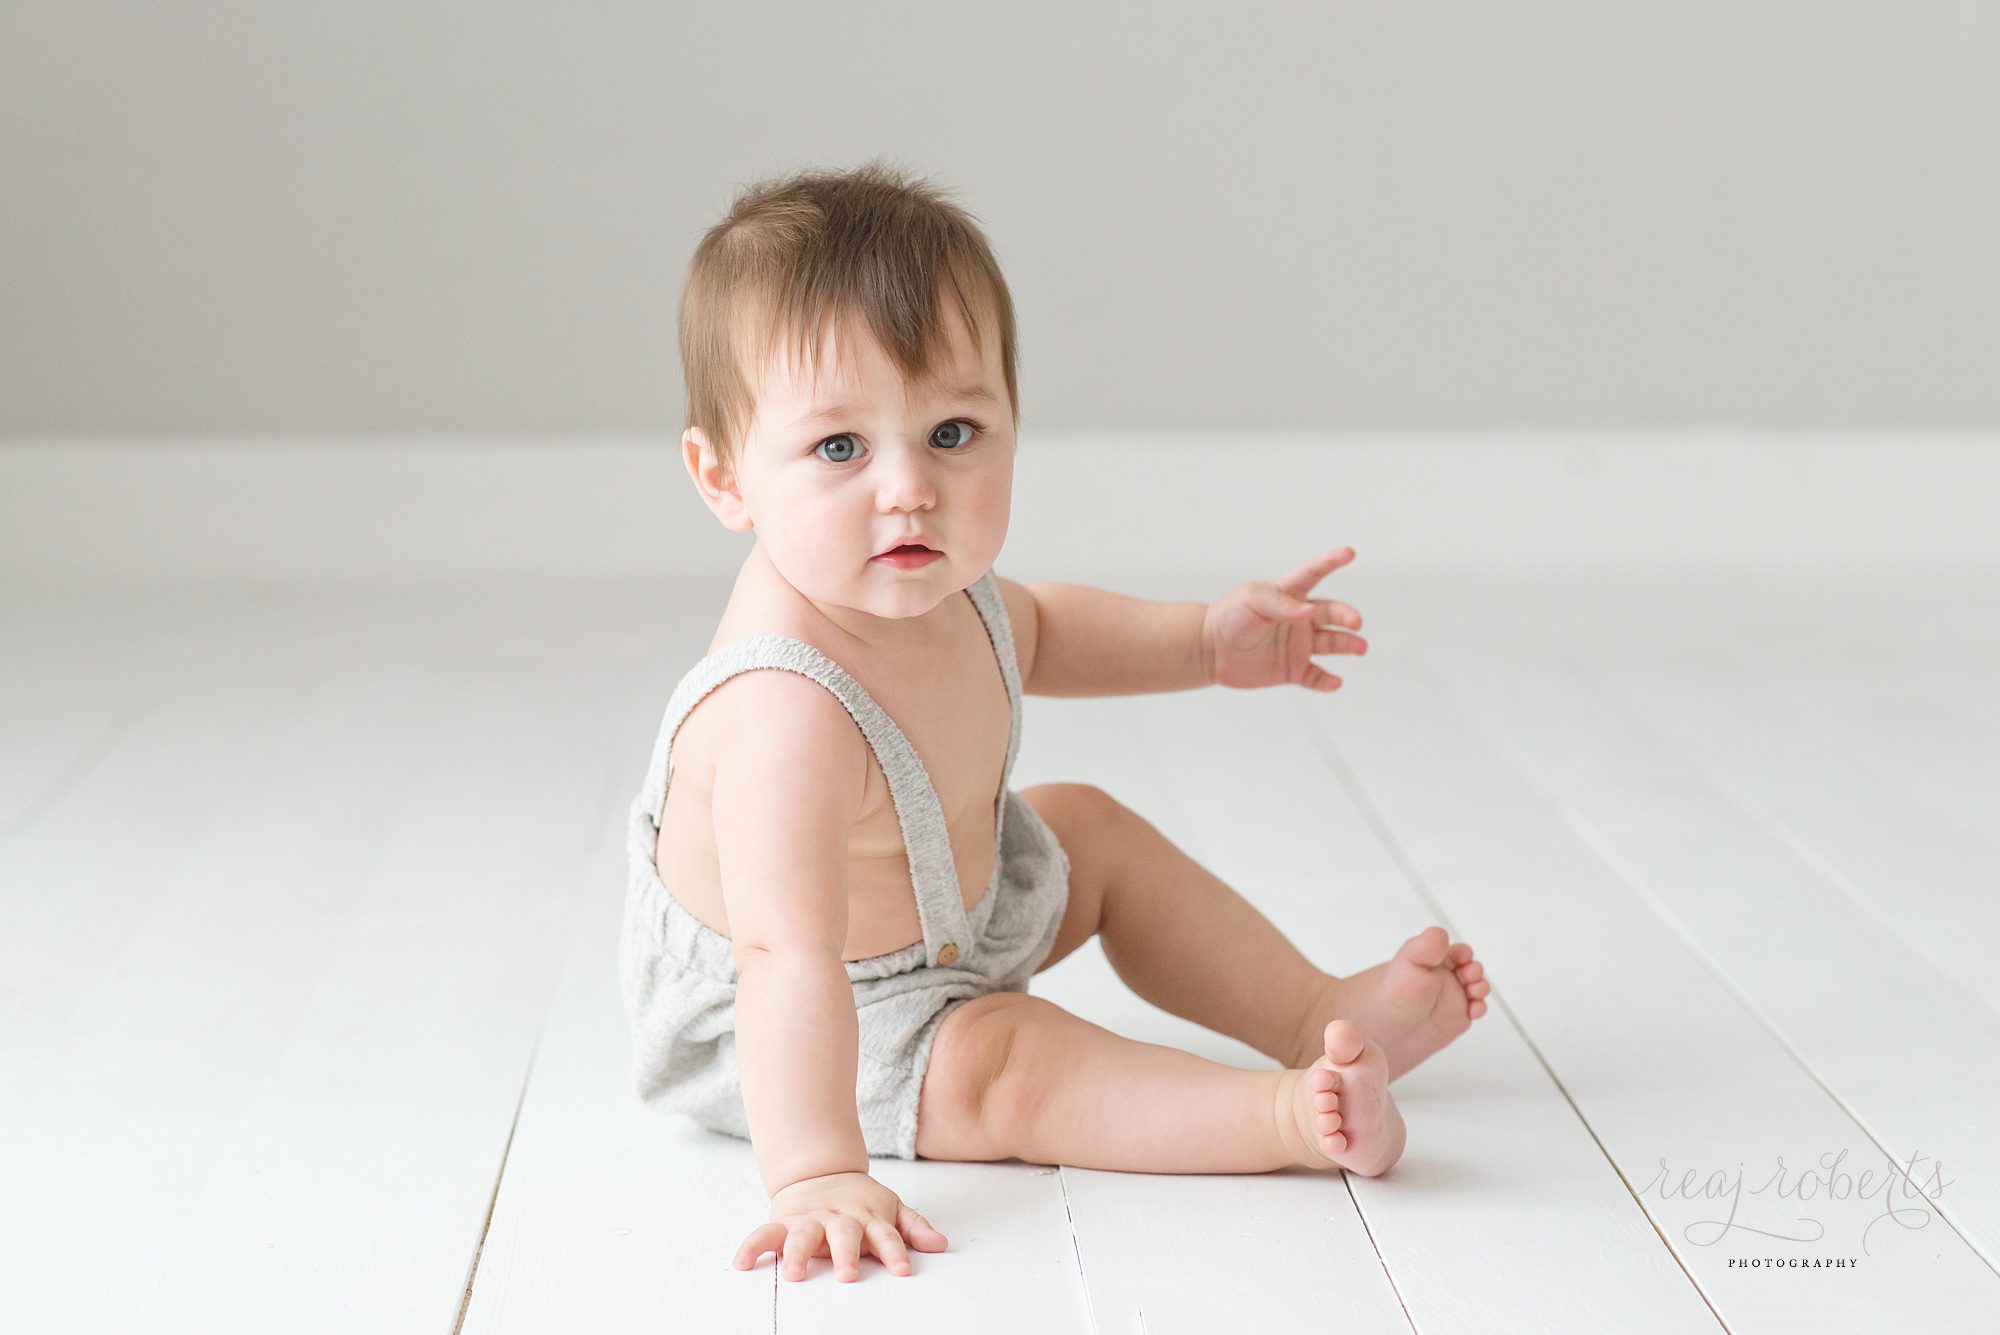 Chandler baby photographer | Reaj Roberts Photography | baby boy sitting up in suspenders outfit